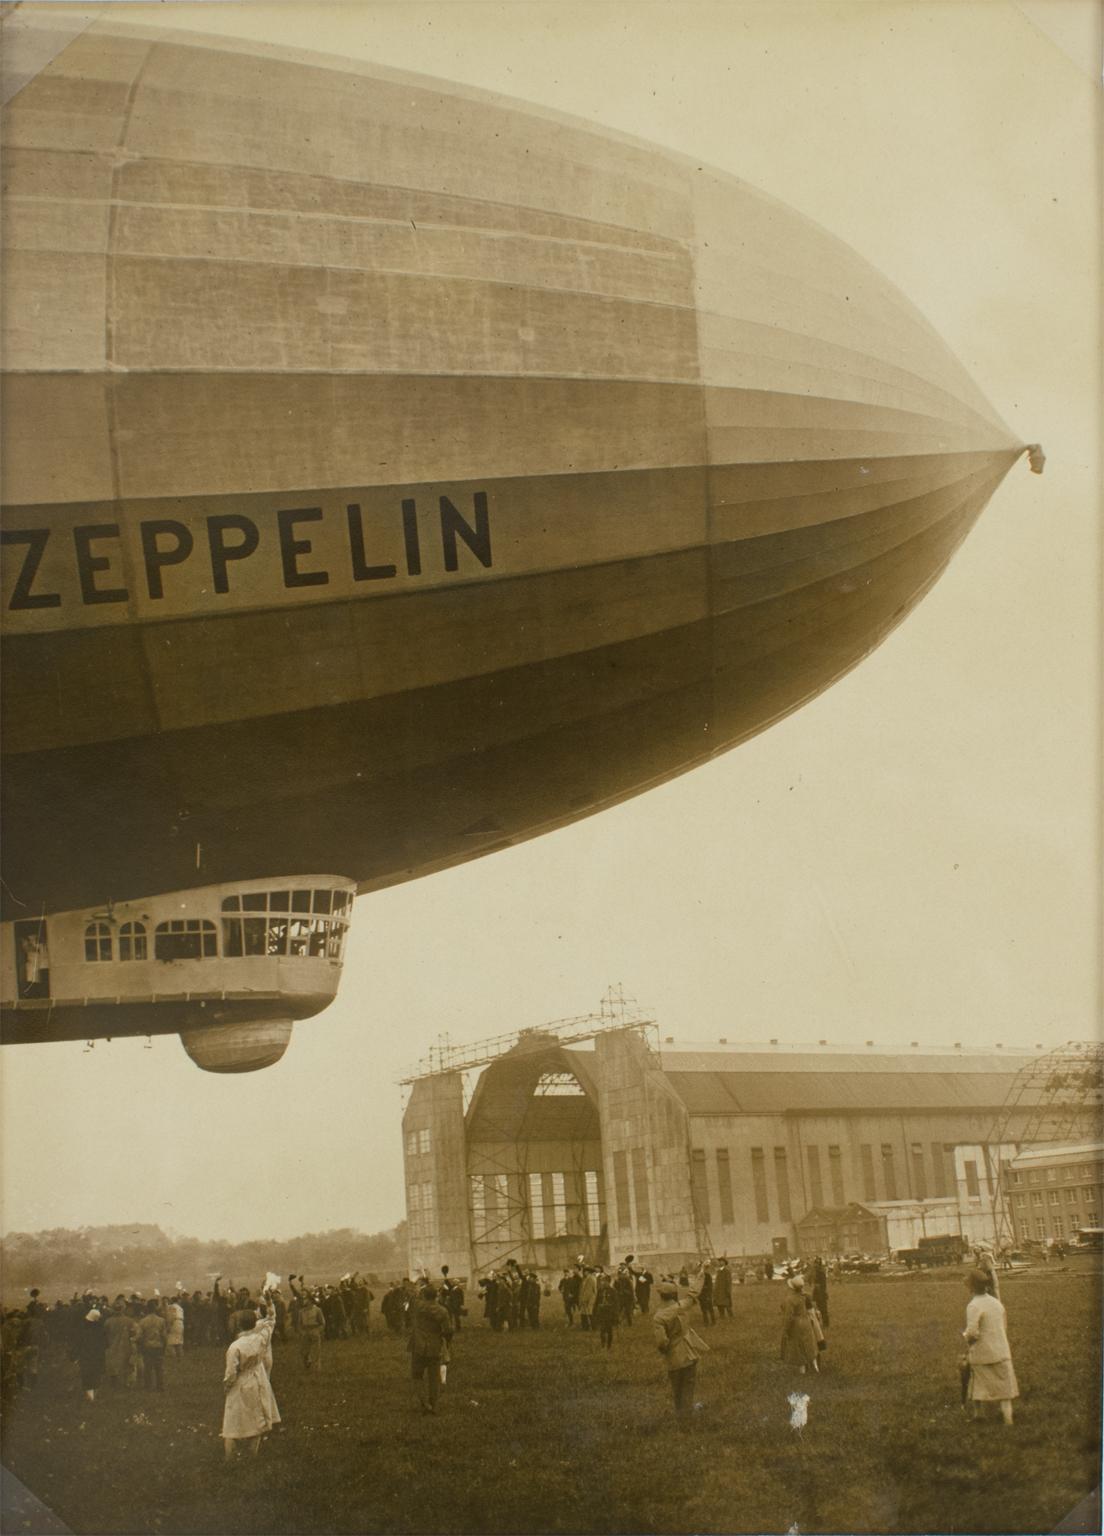 Departure of Zeppelin circa 1930 Silver Gelatin Black and White Photography